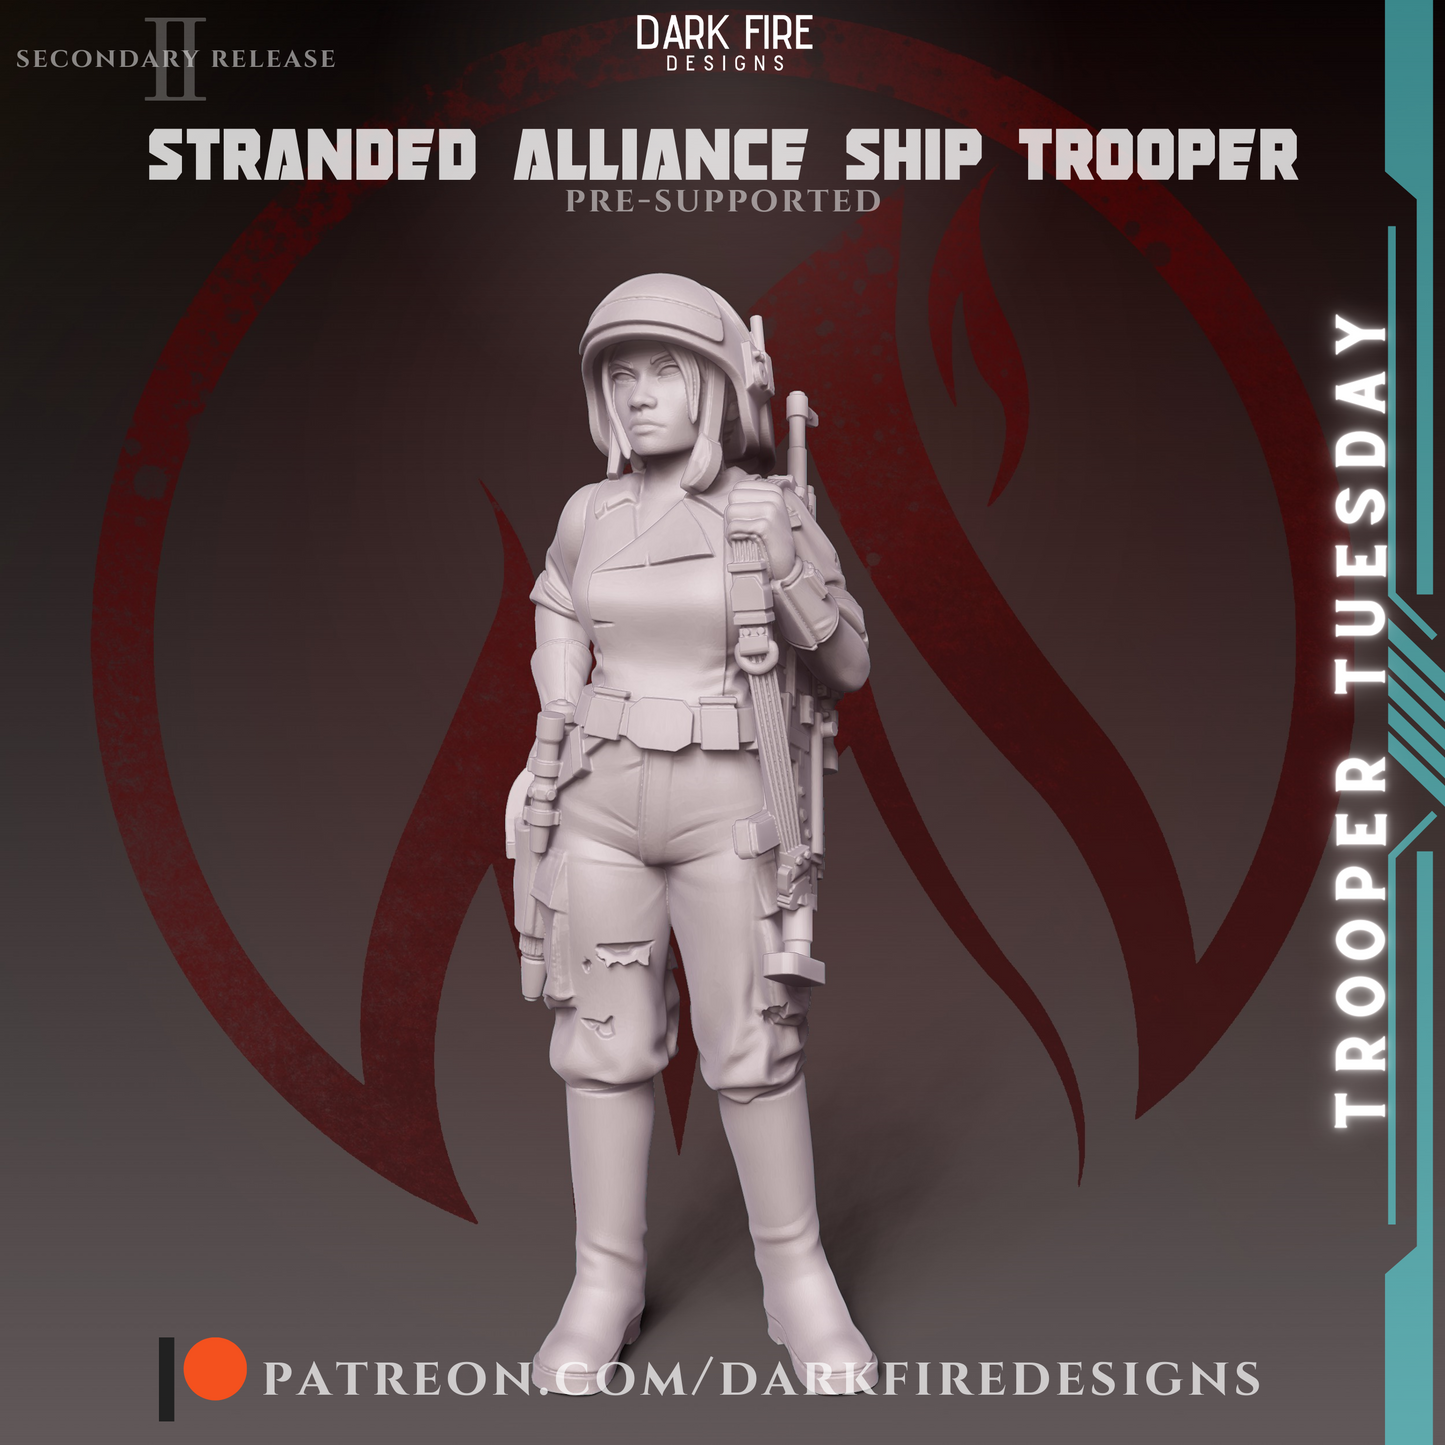 Trooper Tuesday: Stranded Alliance Ship Trooper